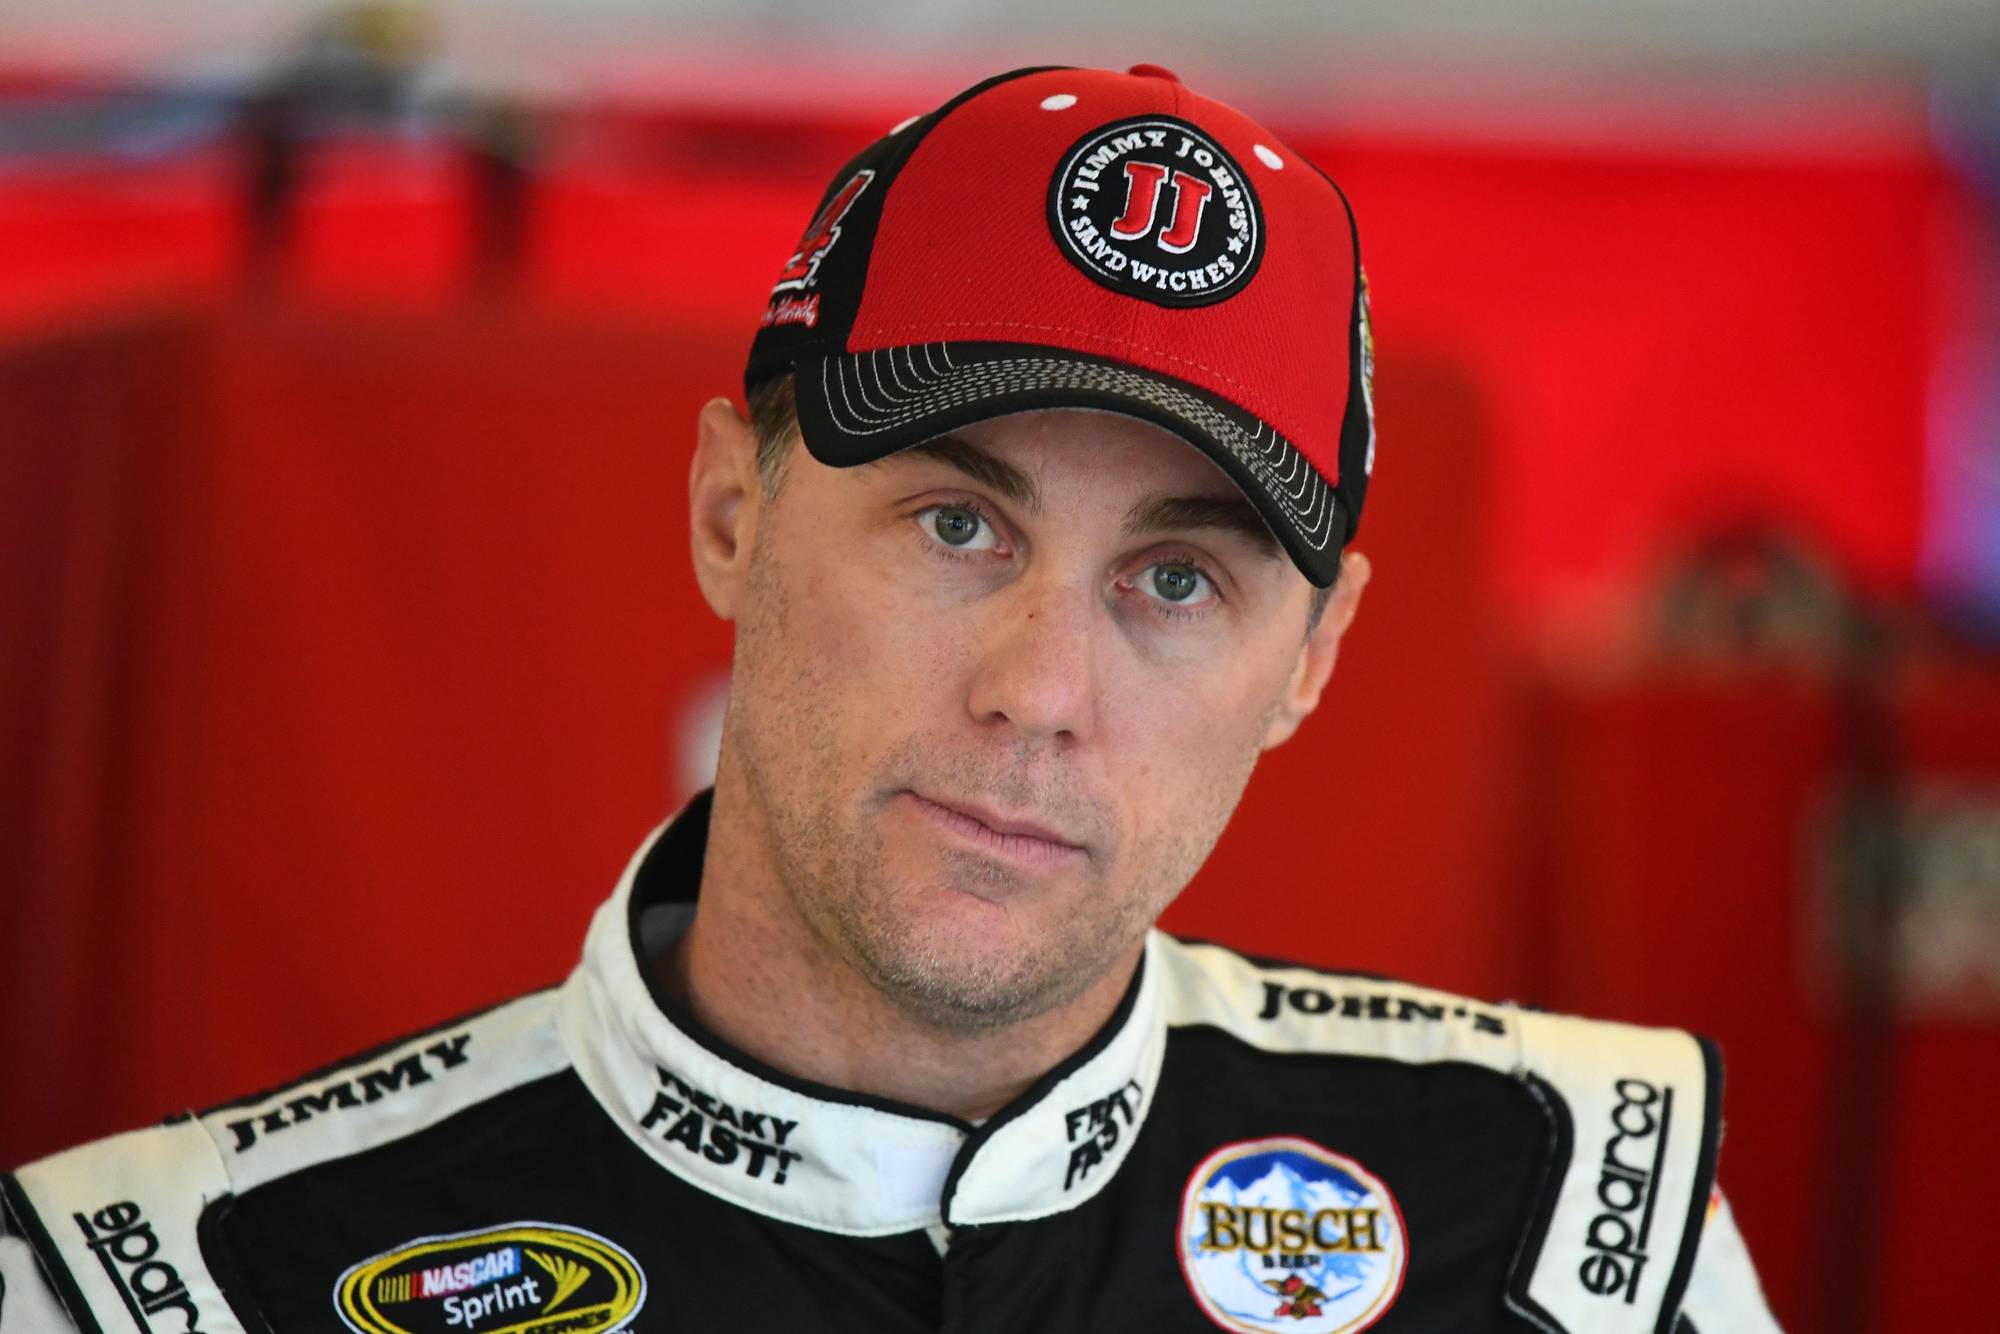 Carry On My Wayward Son - Will Harvick Advance Or Get Shut Out?